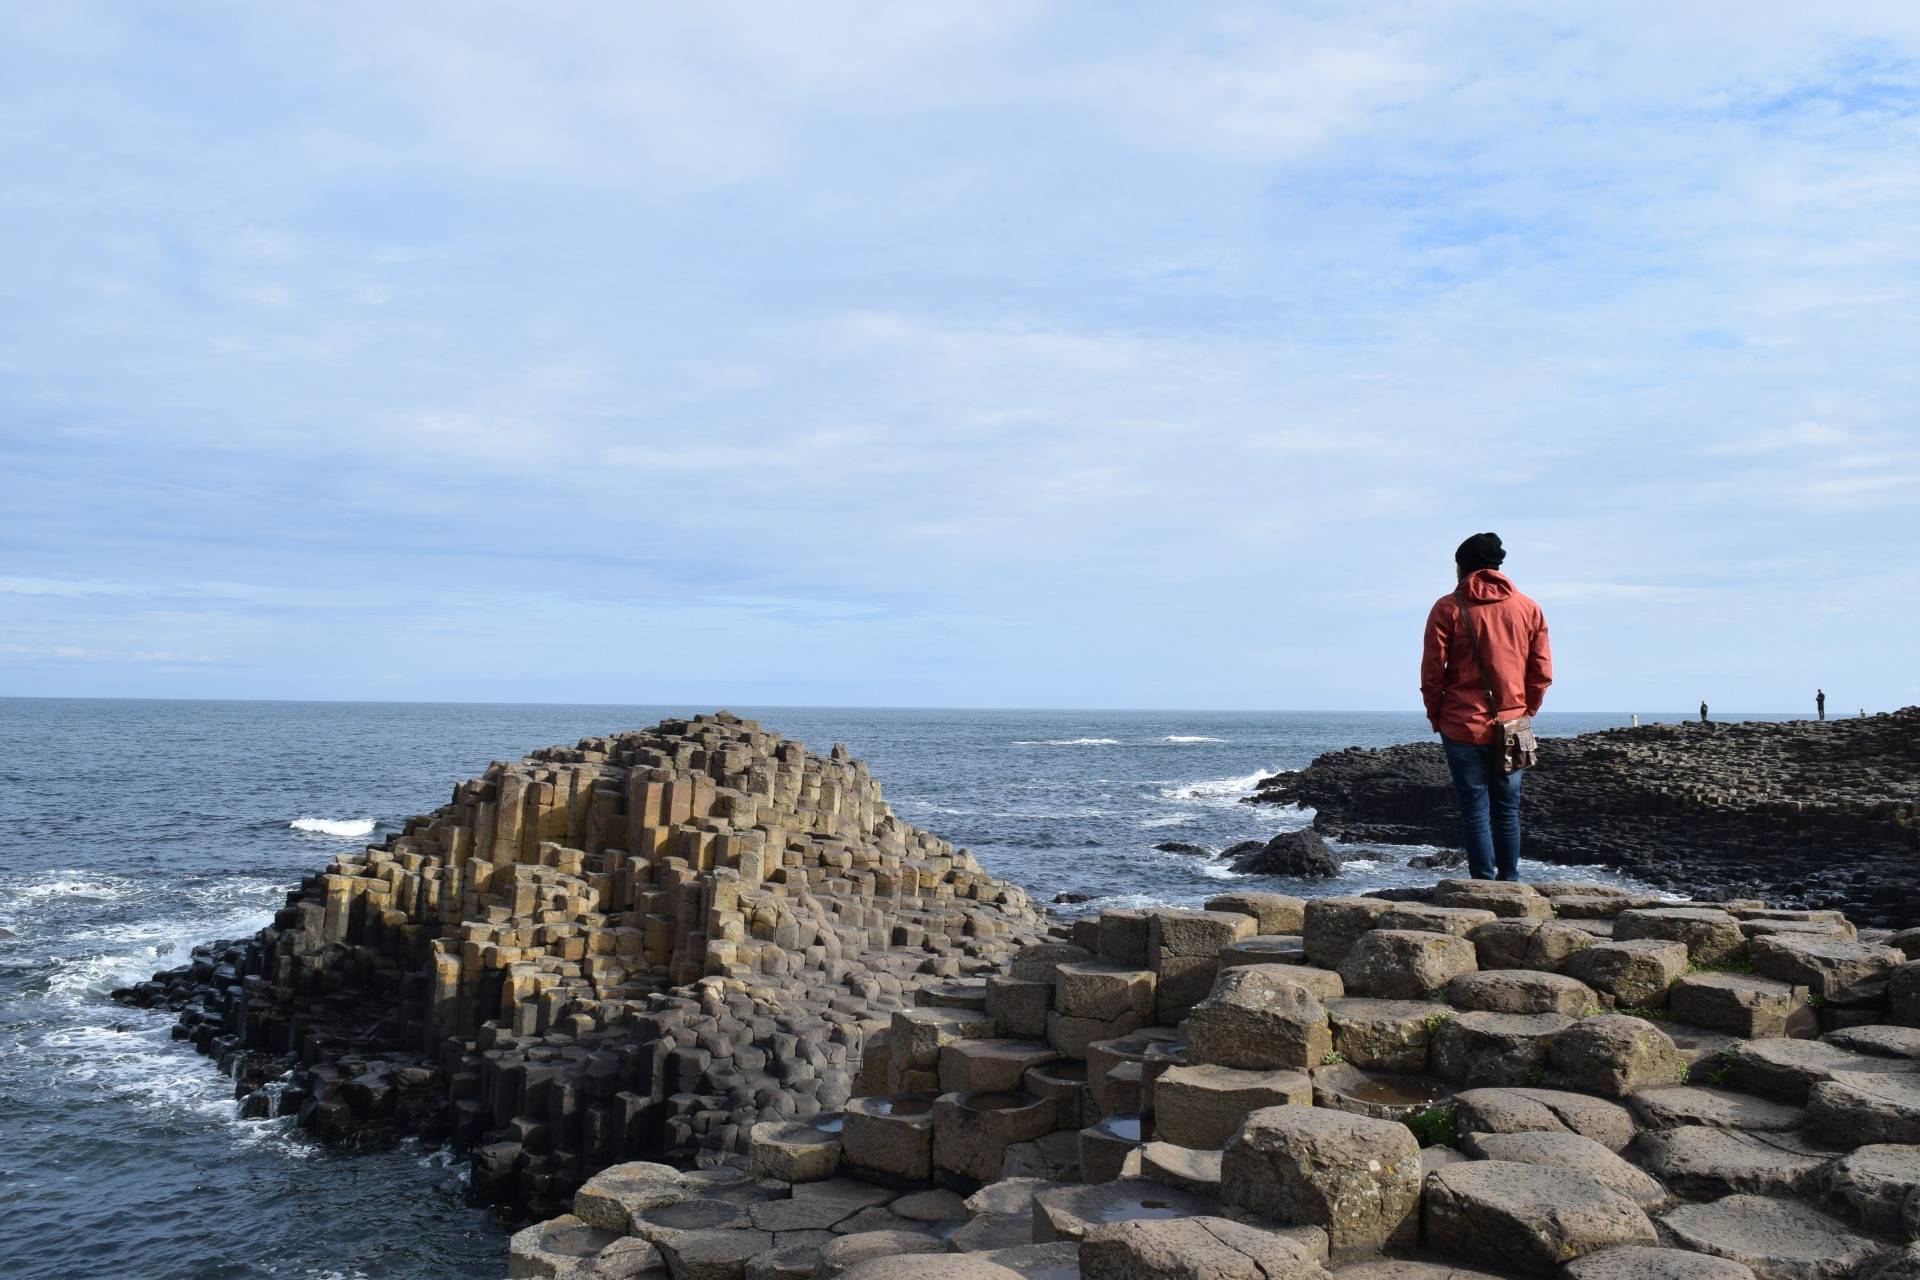 Checking out the Giants Causeway